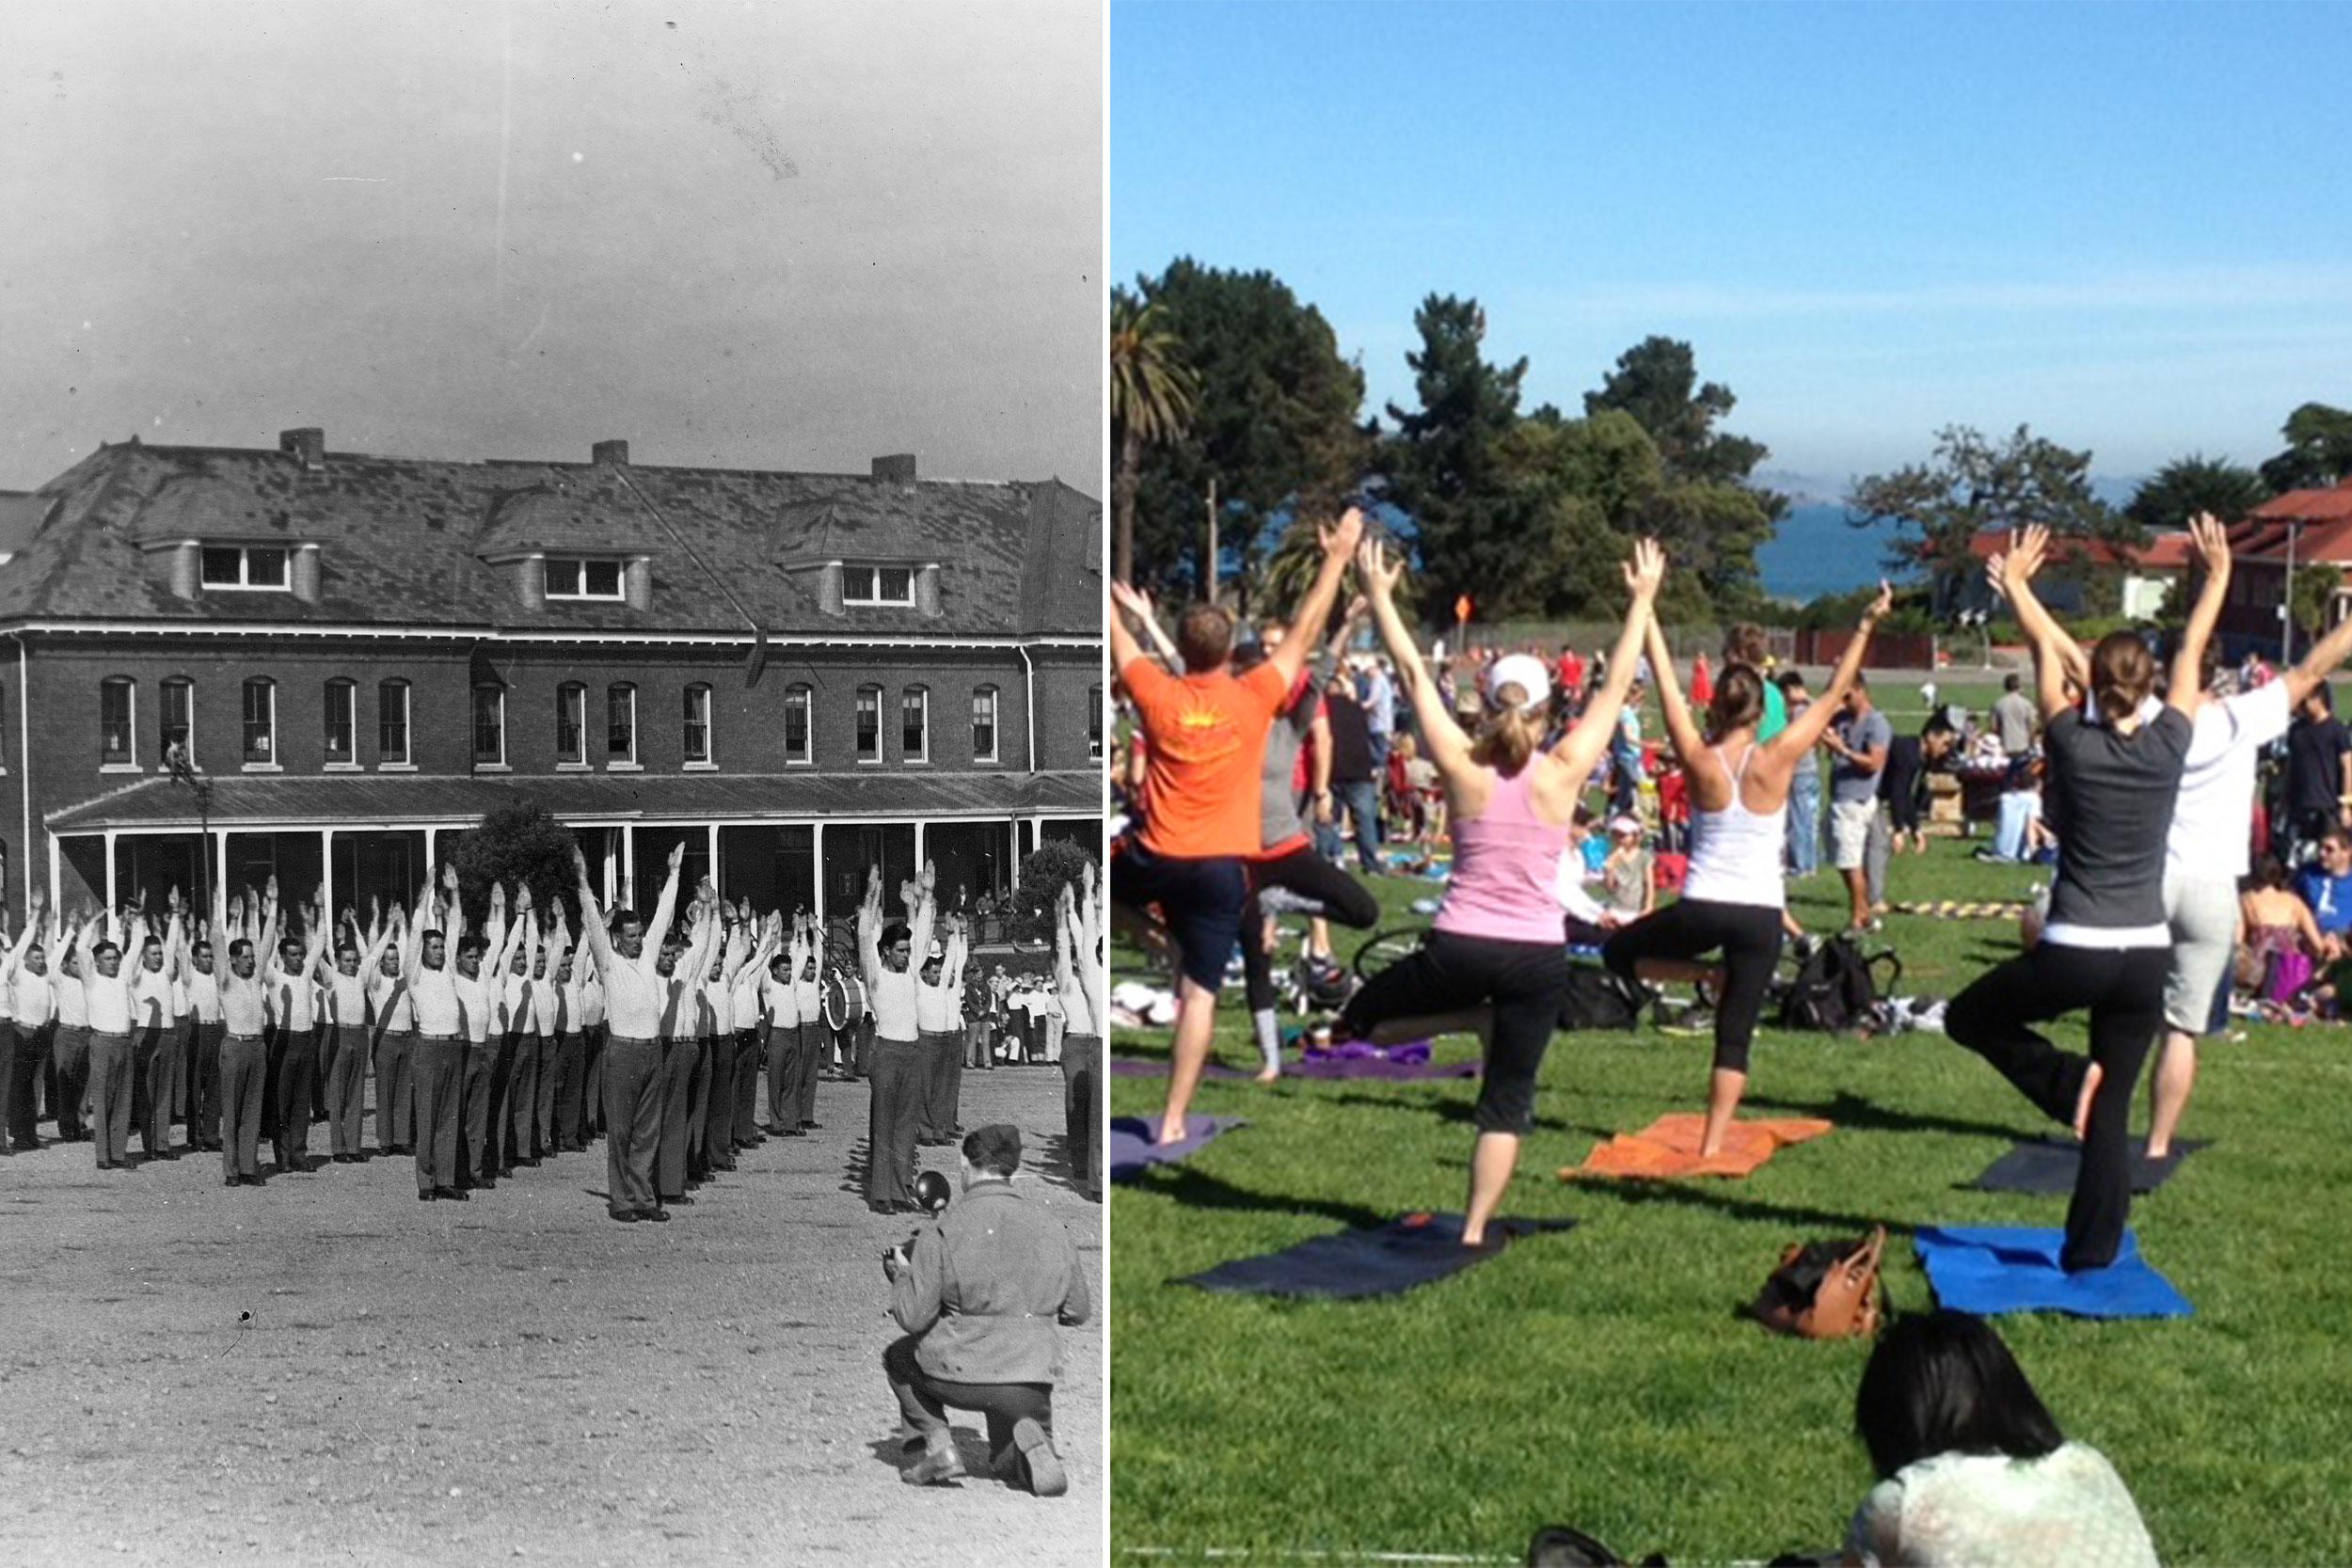 Main Parade Lawn then and now